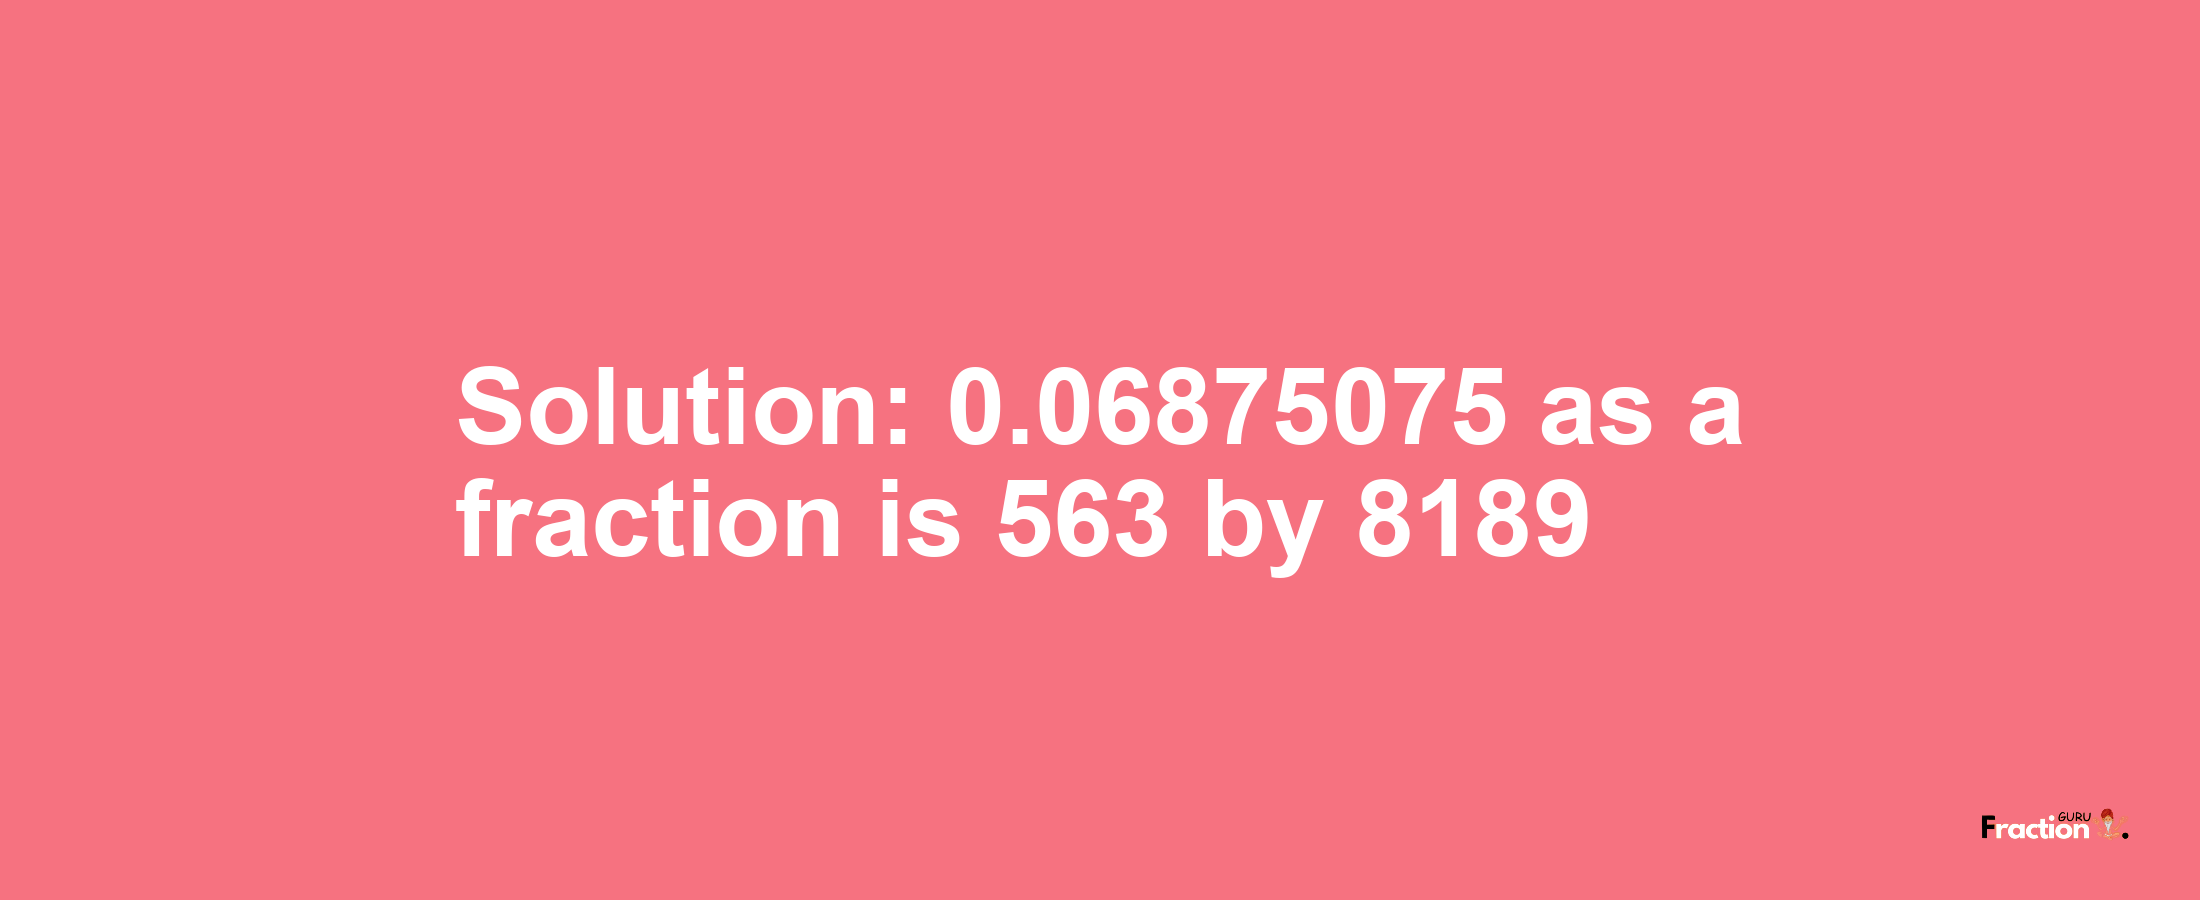 Solution:0.06875075 as a fraction is 563/8189